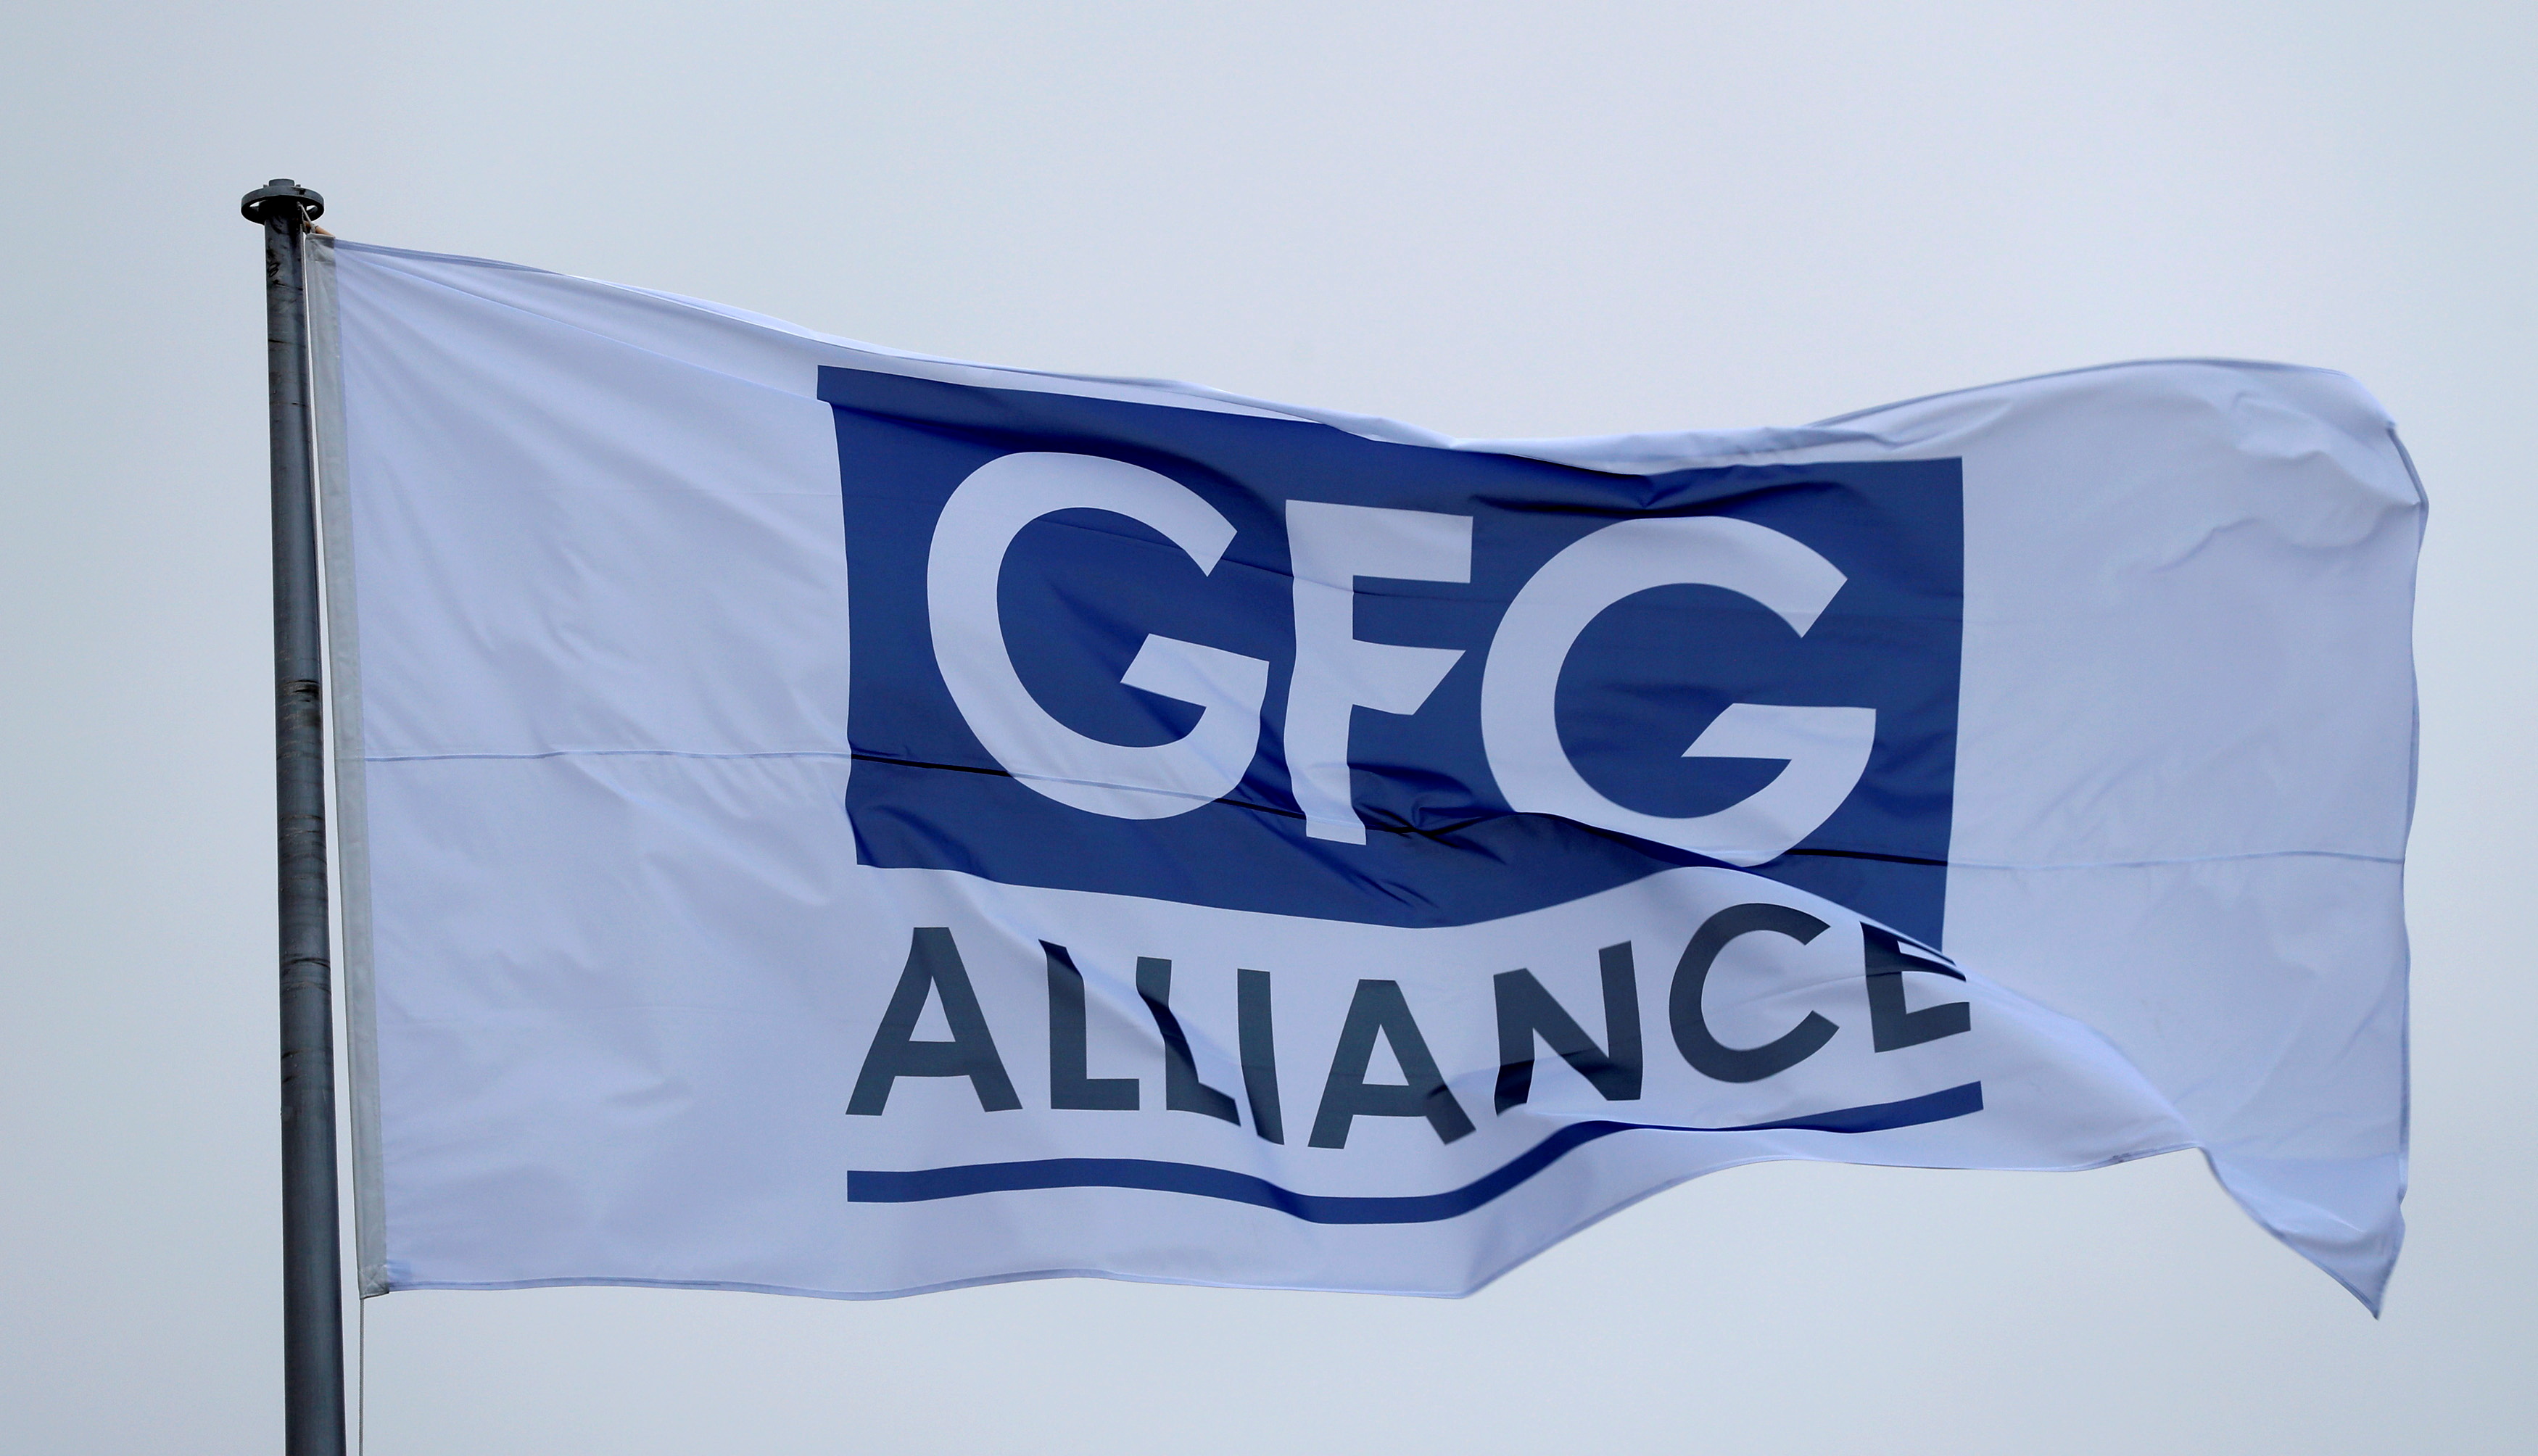 The GFG Alliance flag flies at the completion of a 330 million pound deal to buy Britain's last remaining Aluminium smelter in Fort William Lochaber Scotland, Britain December 19, 2016. REUTERS/Russell Cheyne/File Photo